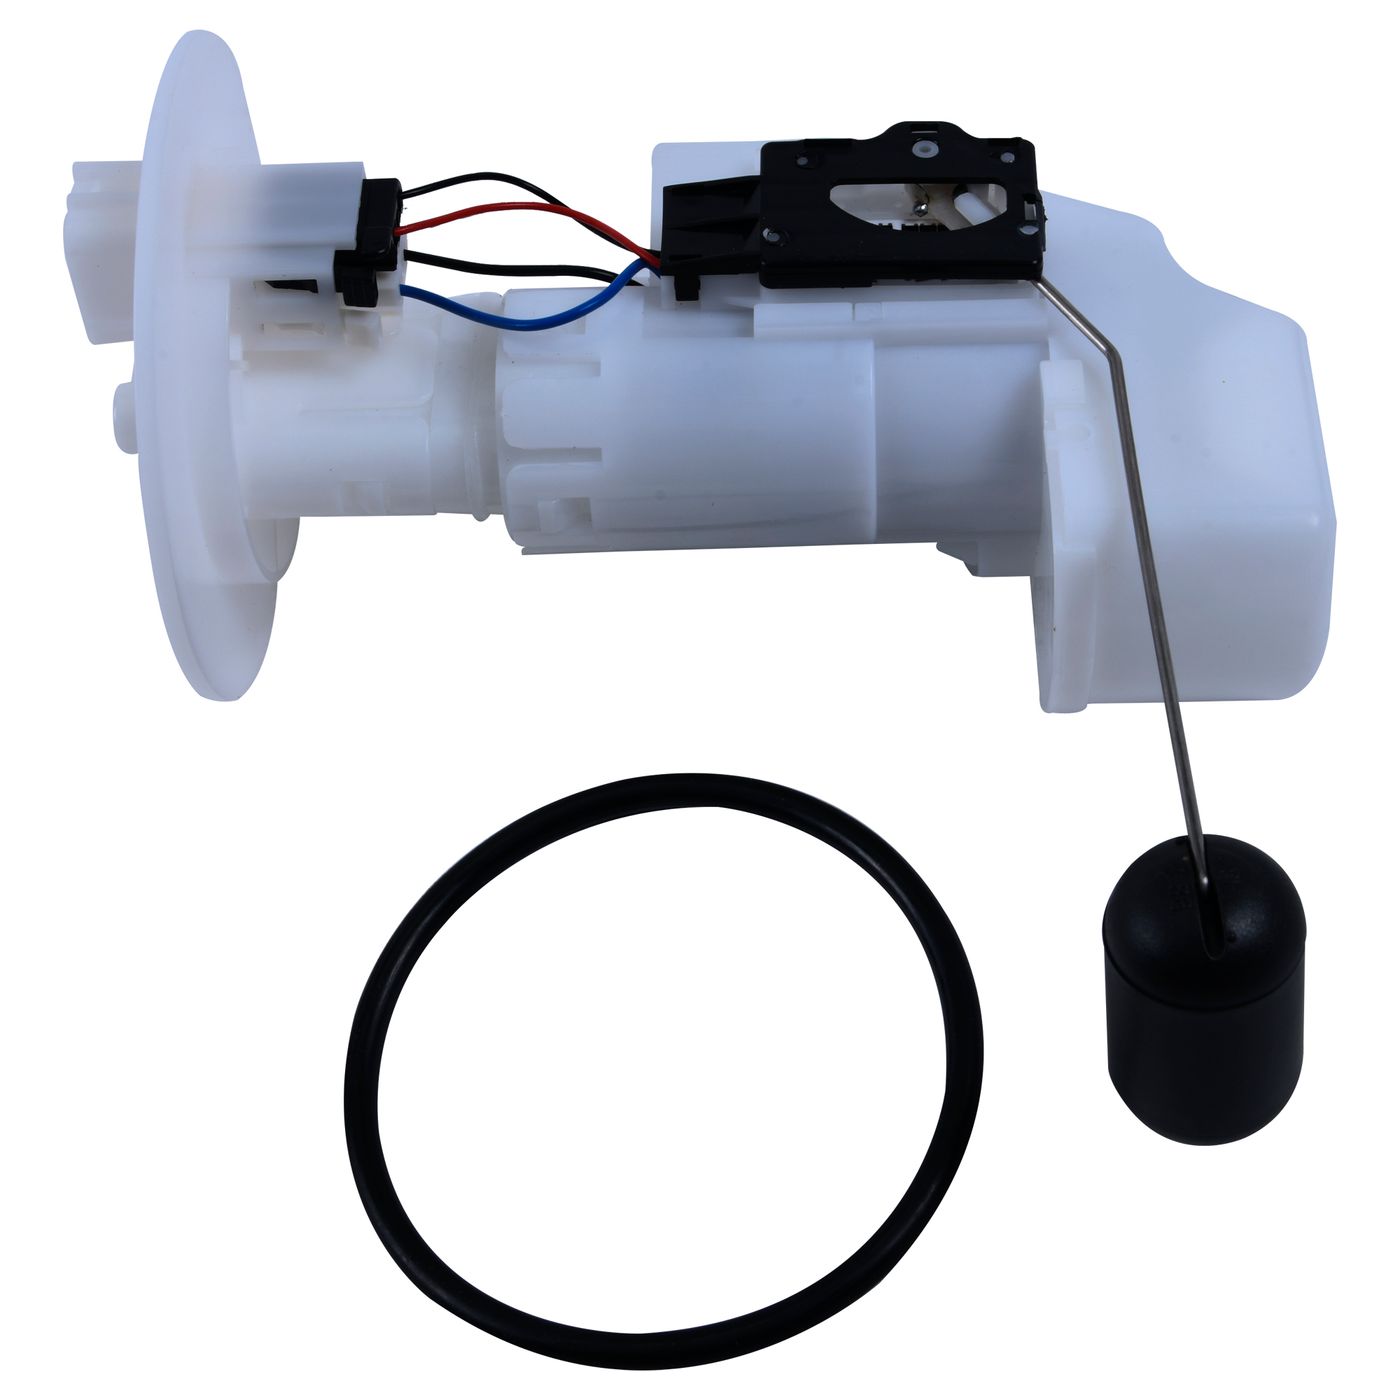 Wrp Fuel Pump Modules - WRP471042 image